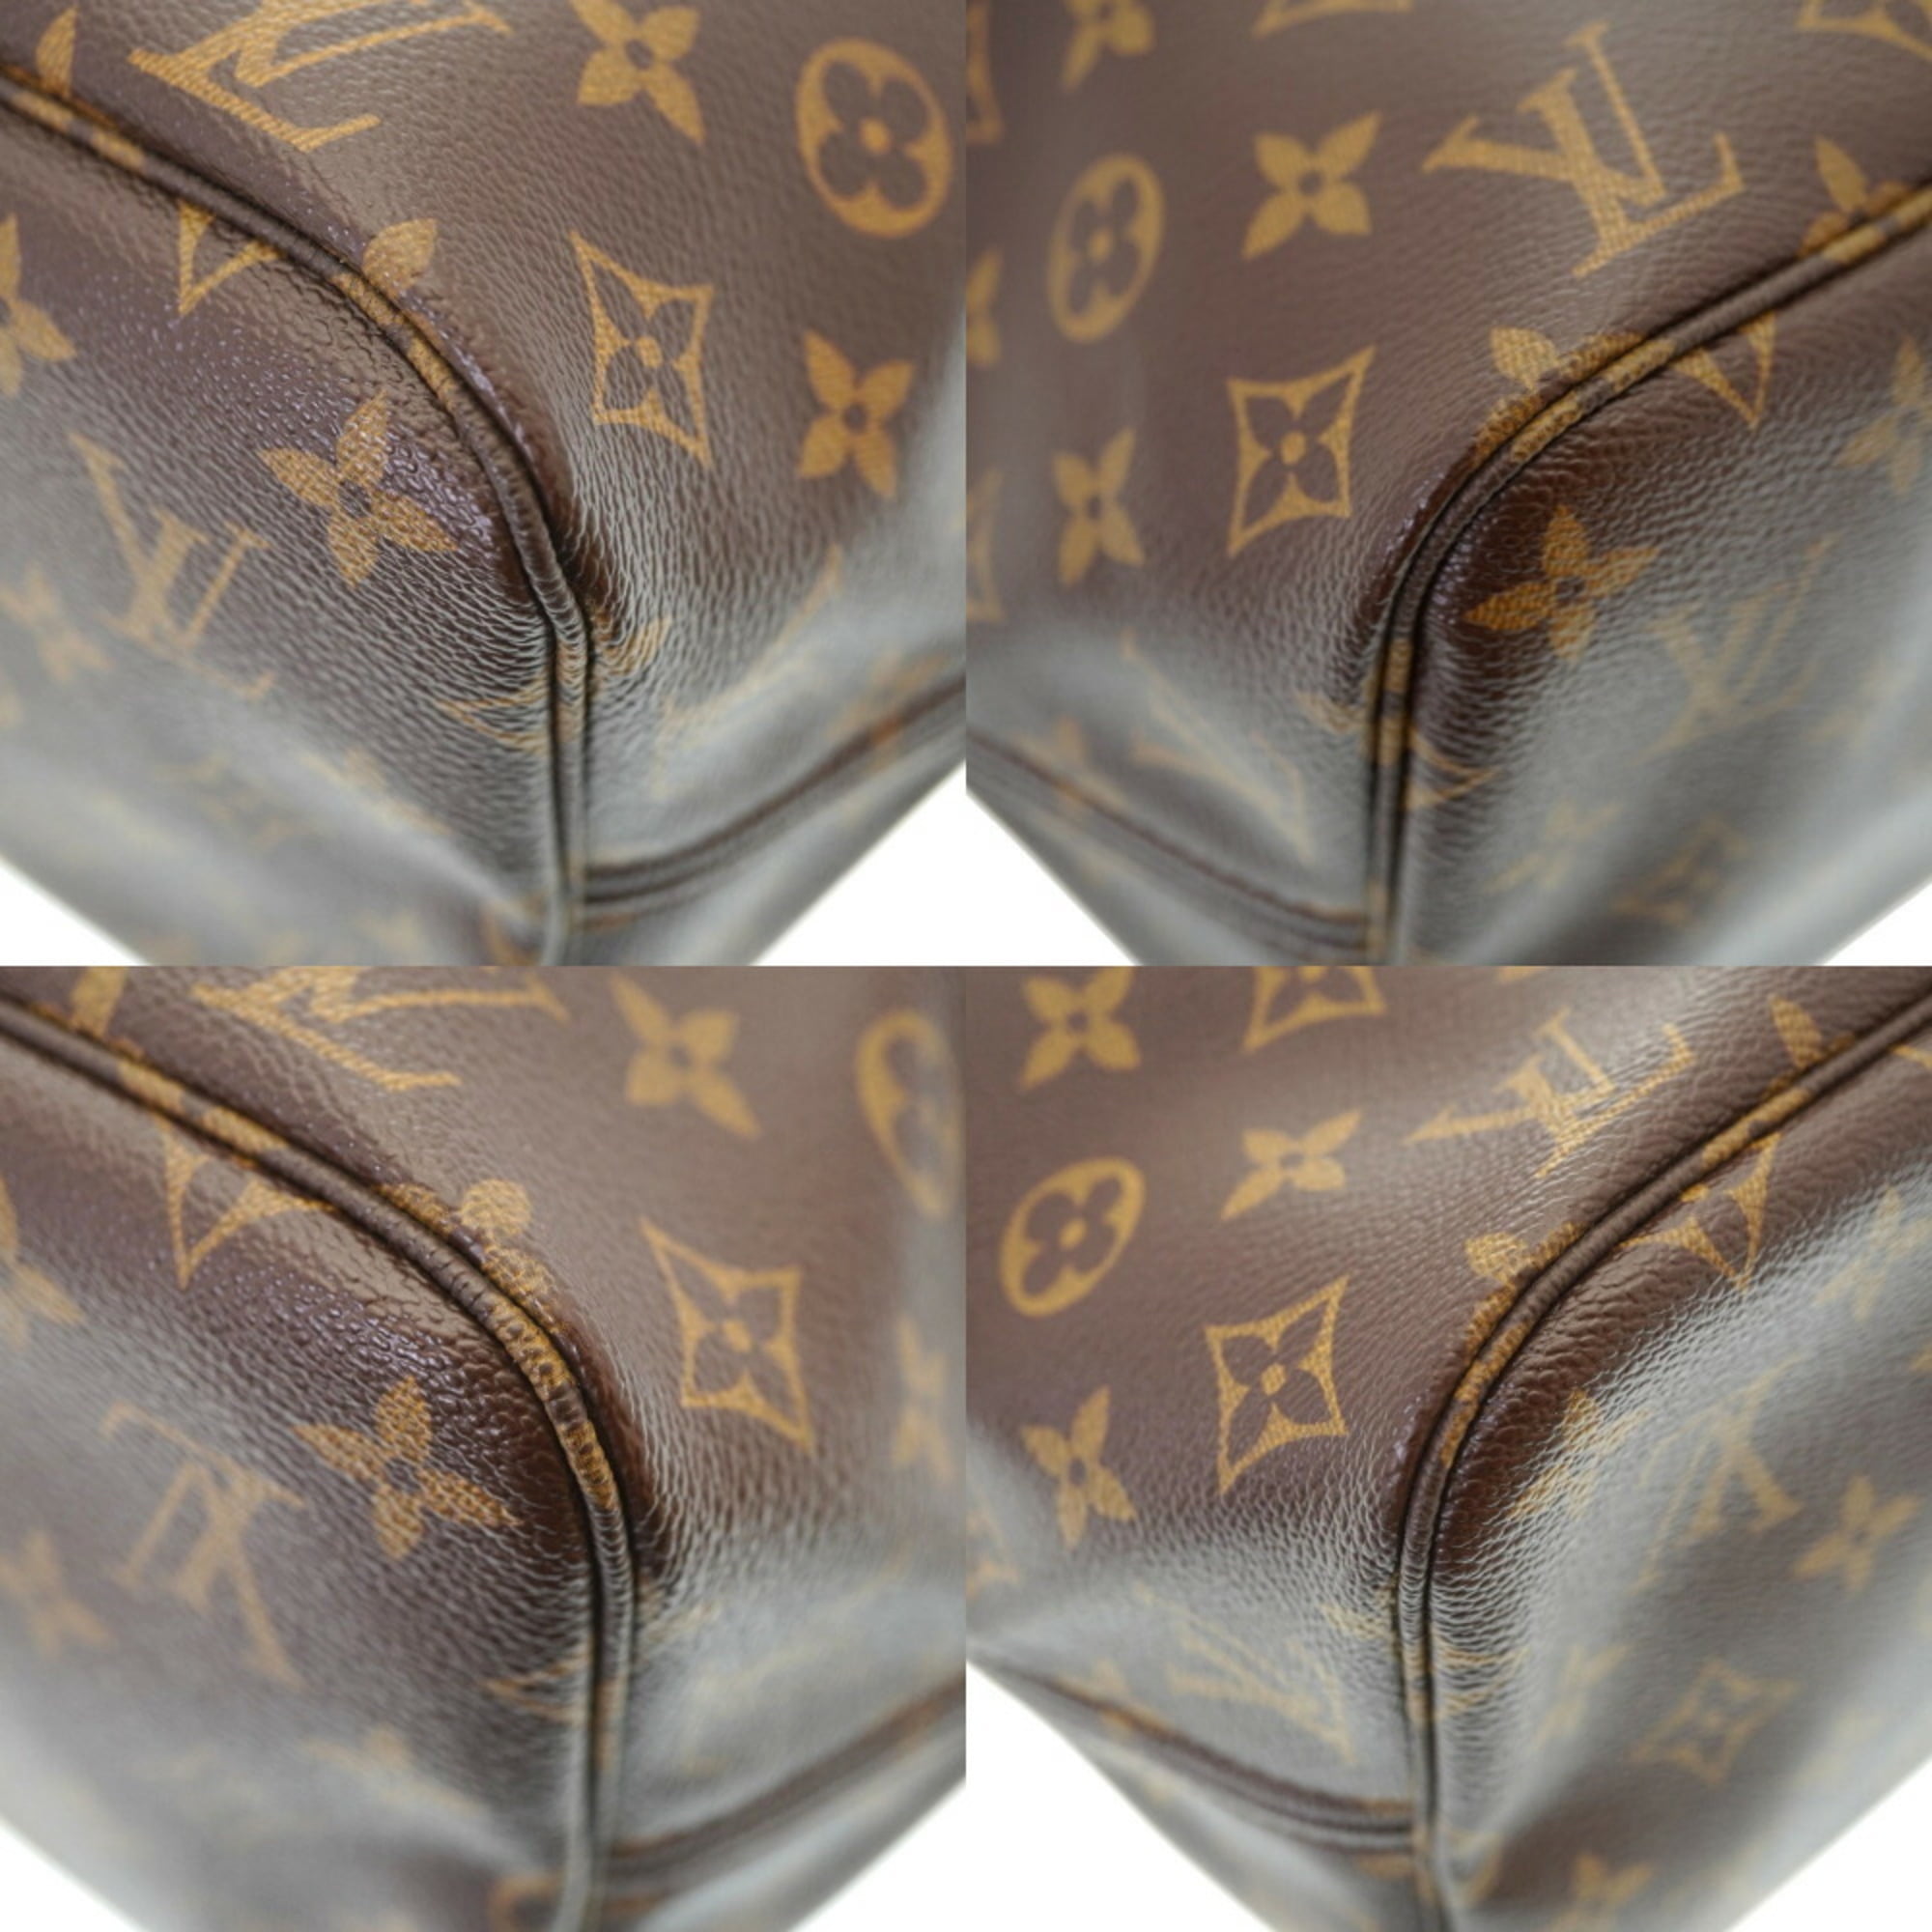 LOUIS VUITTON Neverfull MM MOCA Limited Takashi Murakami Shoulder Tote Bag  M95560｜Product Code：2111900153203｜BRAND OFF Online Store